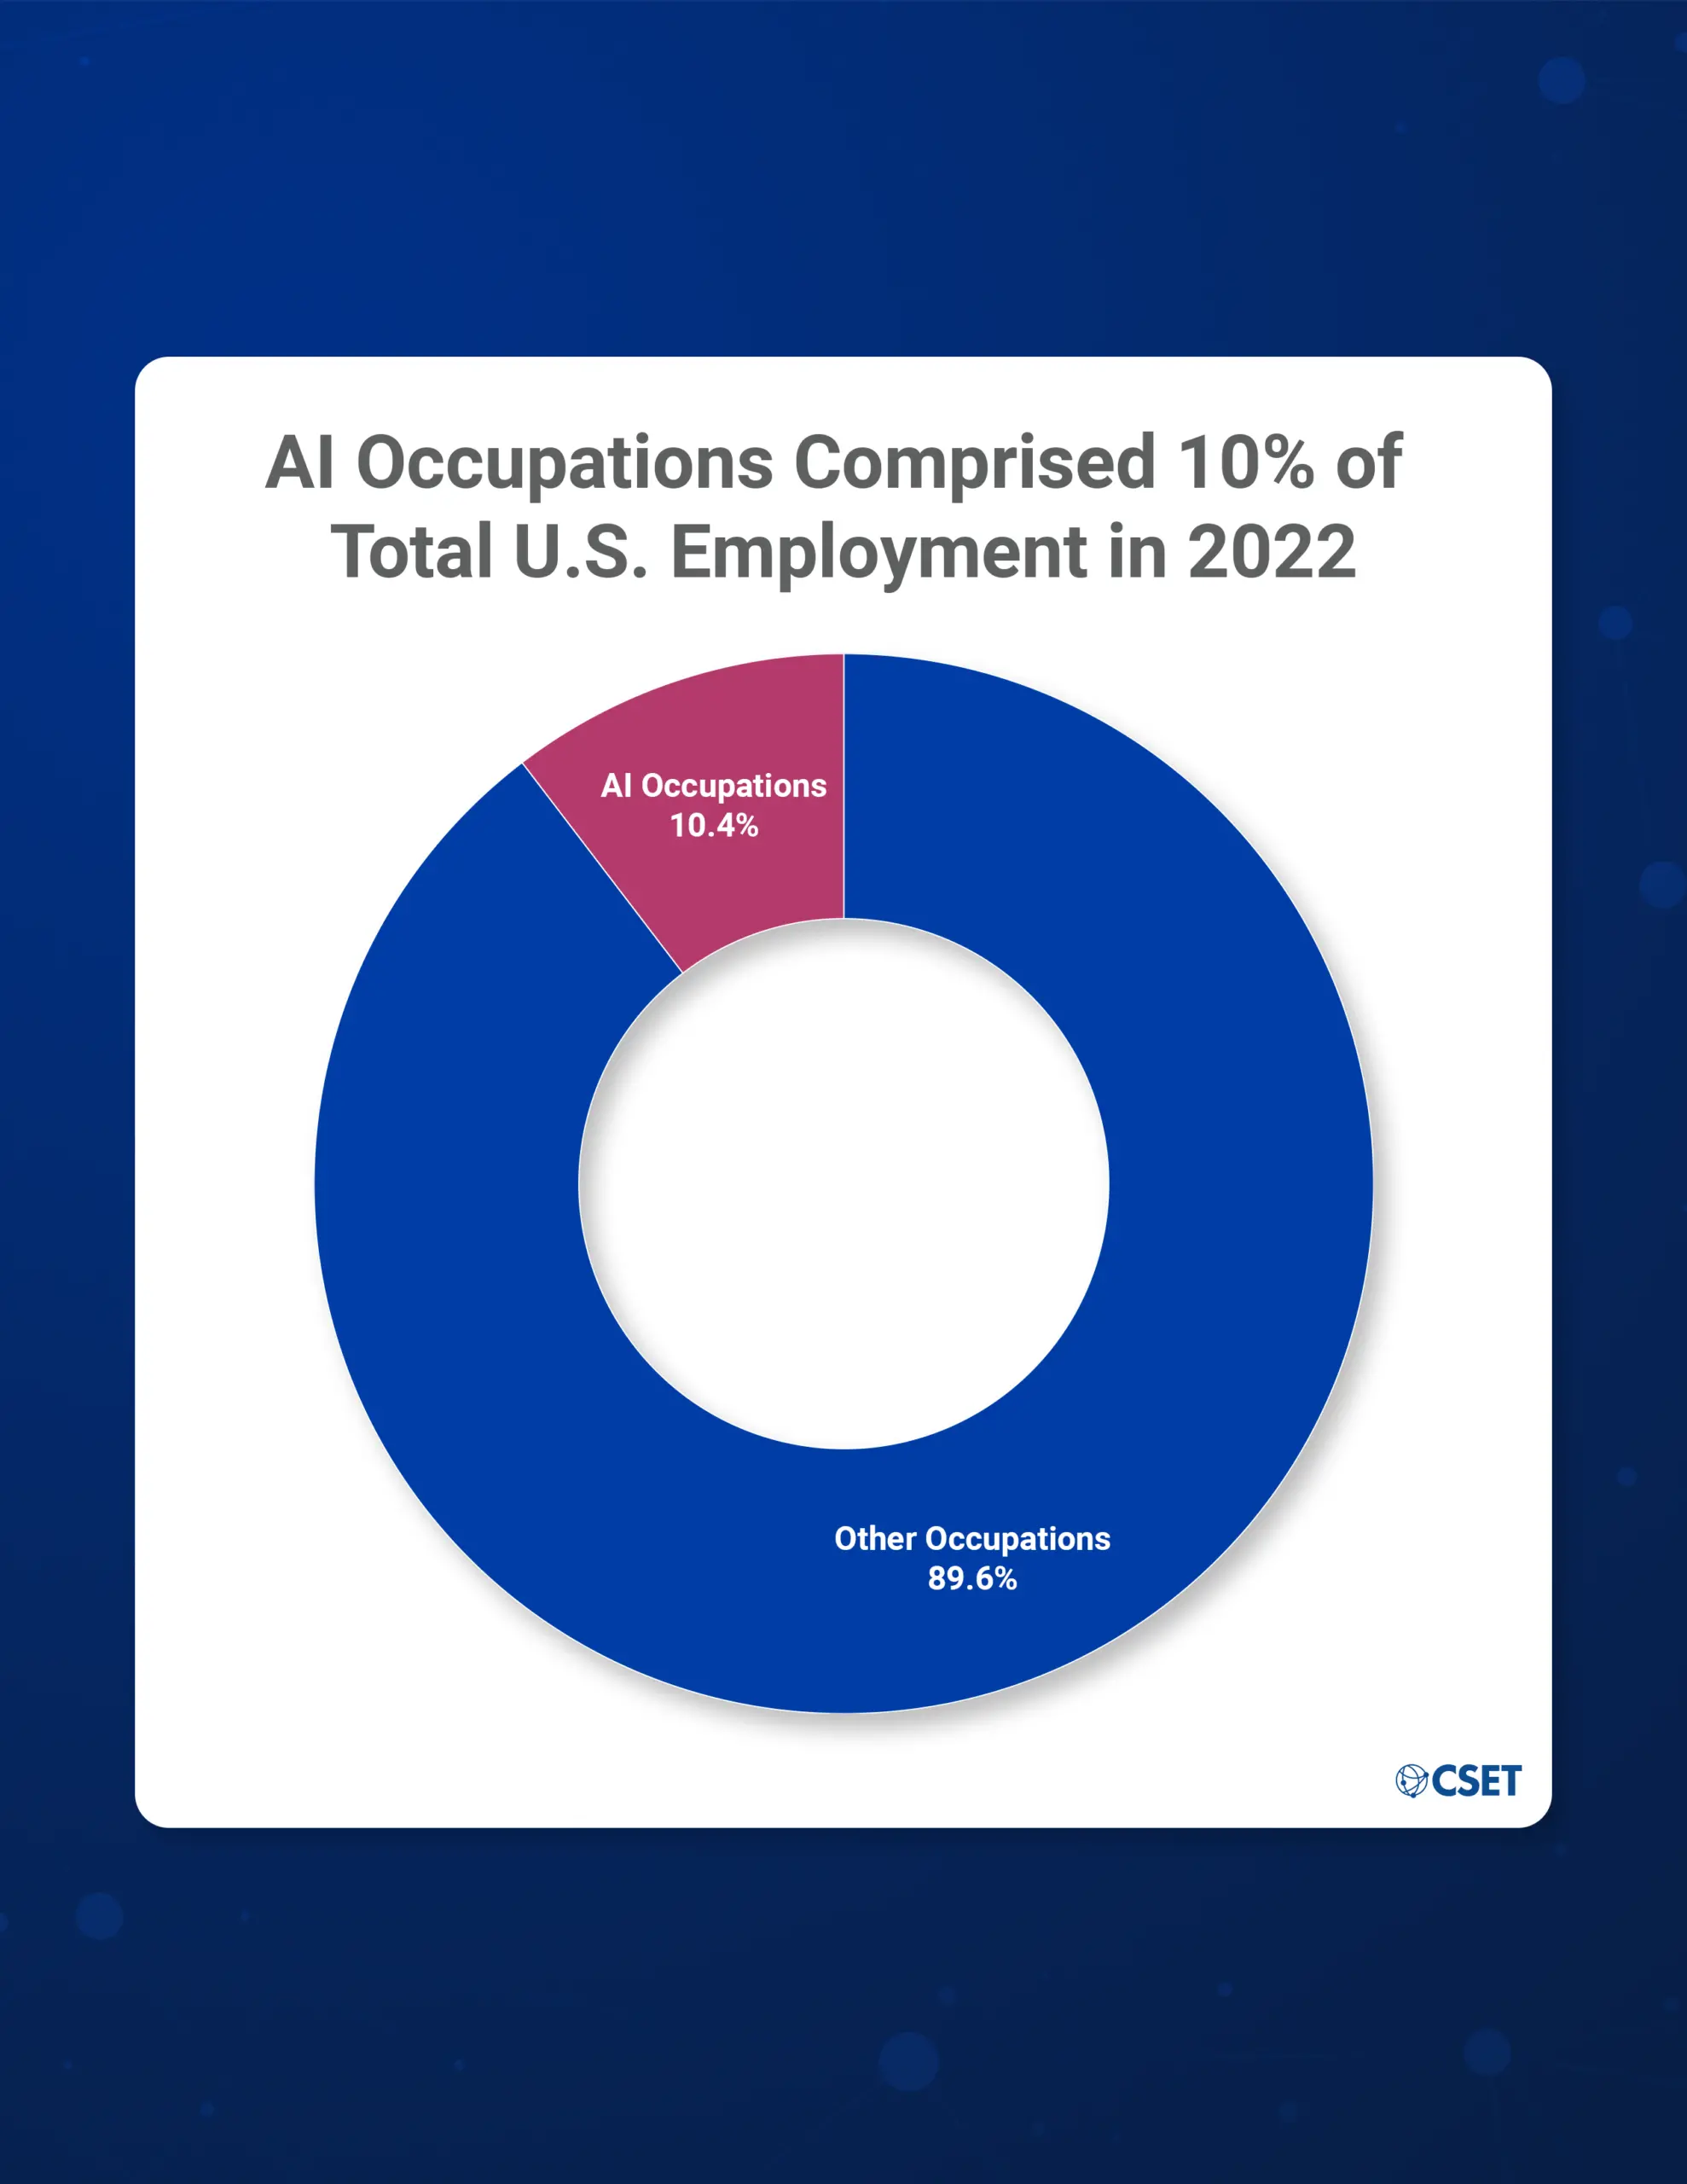 In 2022, approximately 10.4% of U.S. Workforce participants can be categorized as part of the US AI Workforce. This donut graph has two wedges: 1 in magenta representing 10.4% (the U.S. AI Workforce) and the remaining 89.6% representing Other occupations.